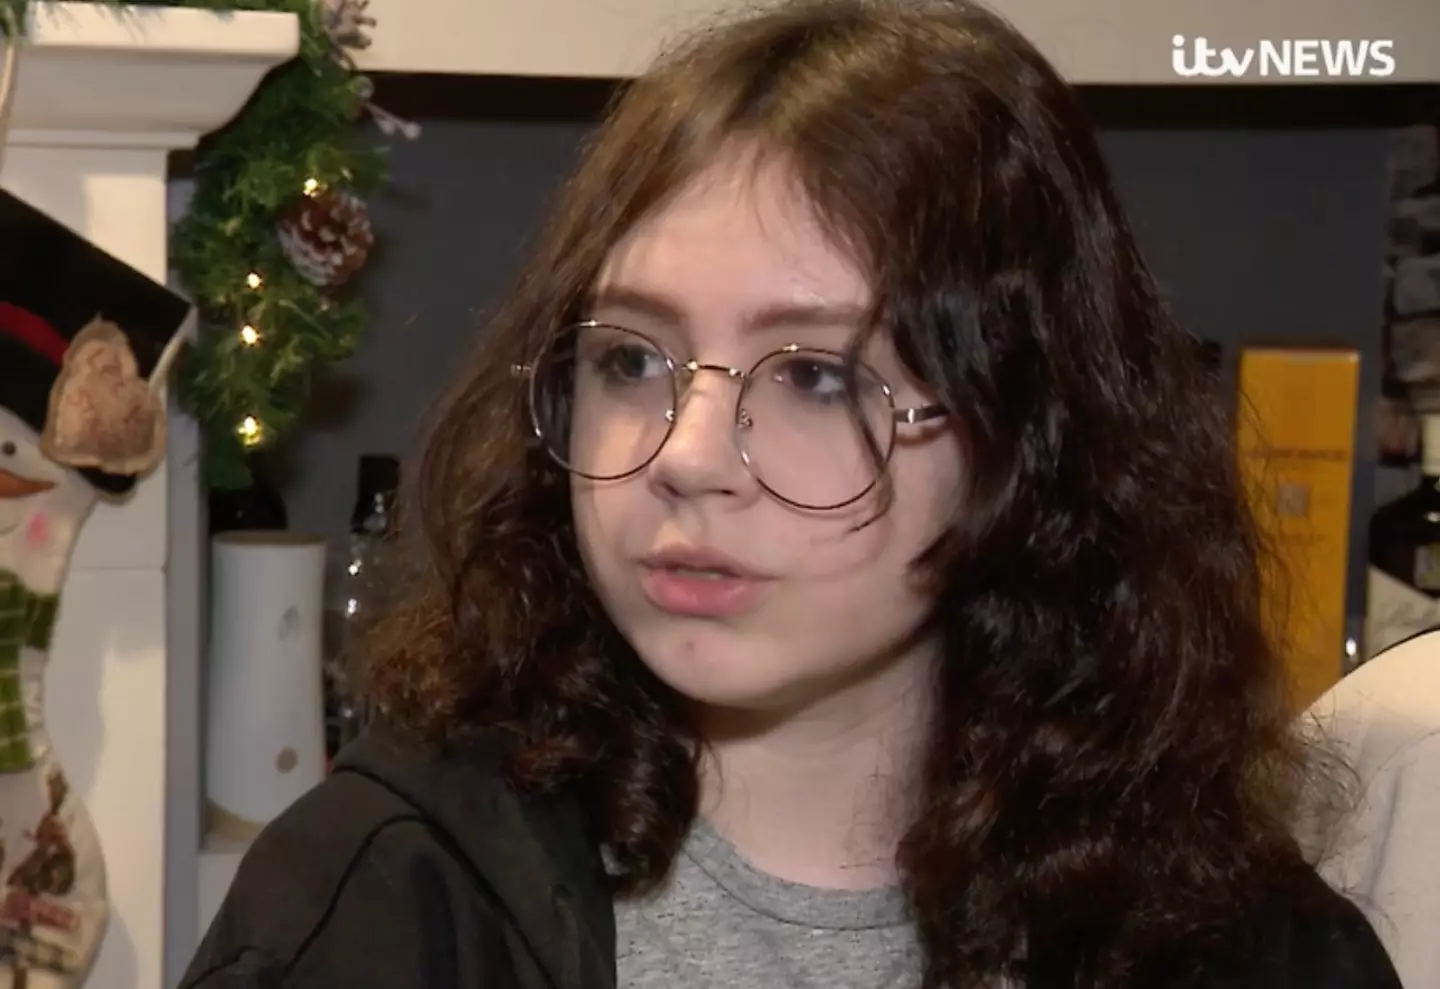 Oliwia Szewc recalled the moment she bravely attempted to save the three boys.